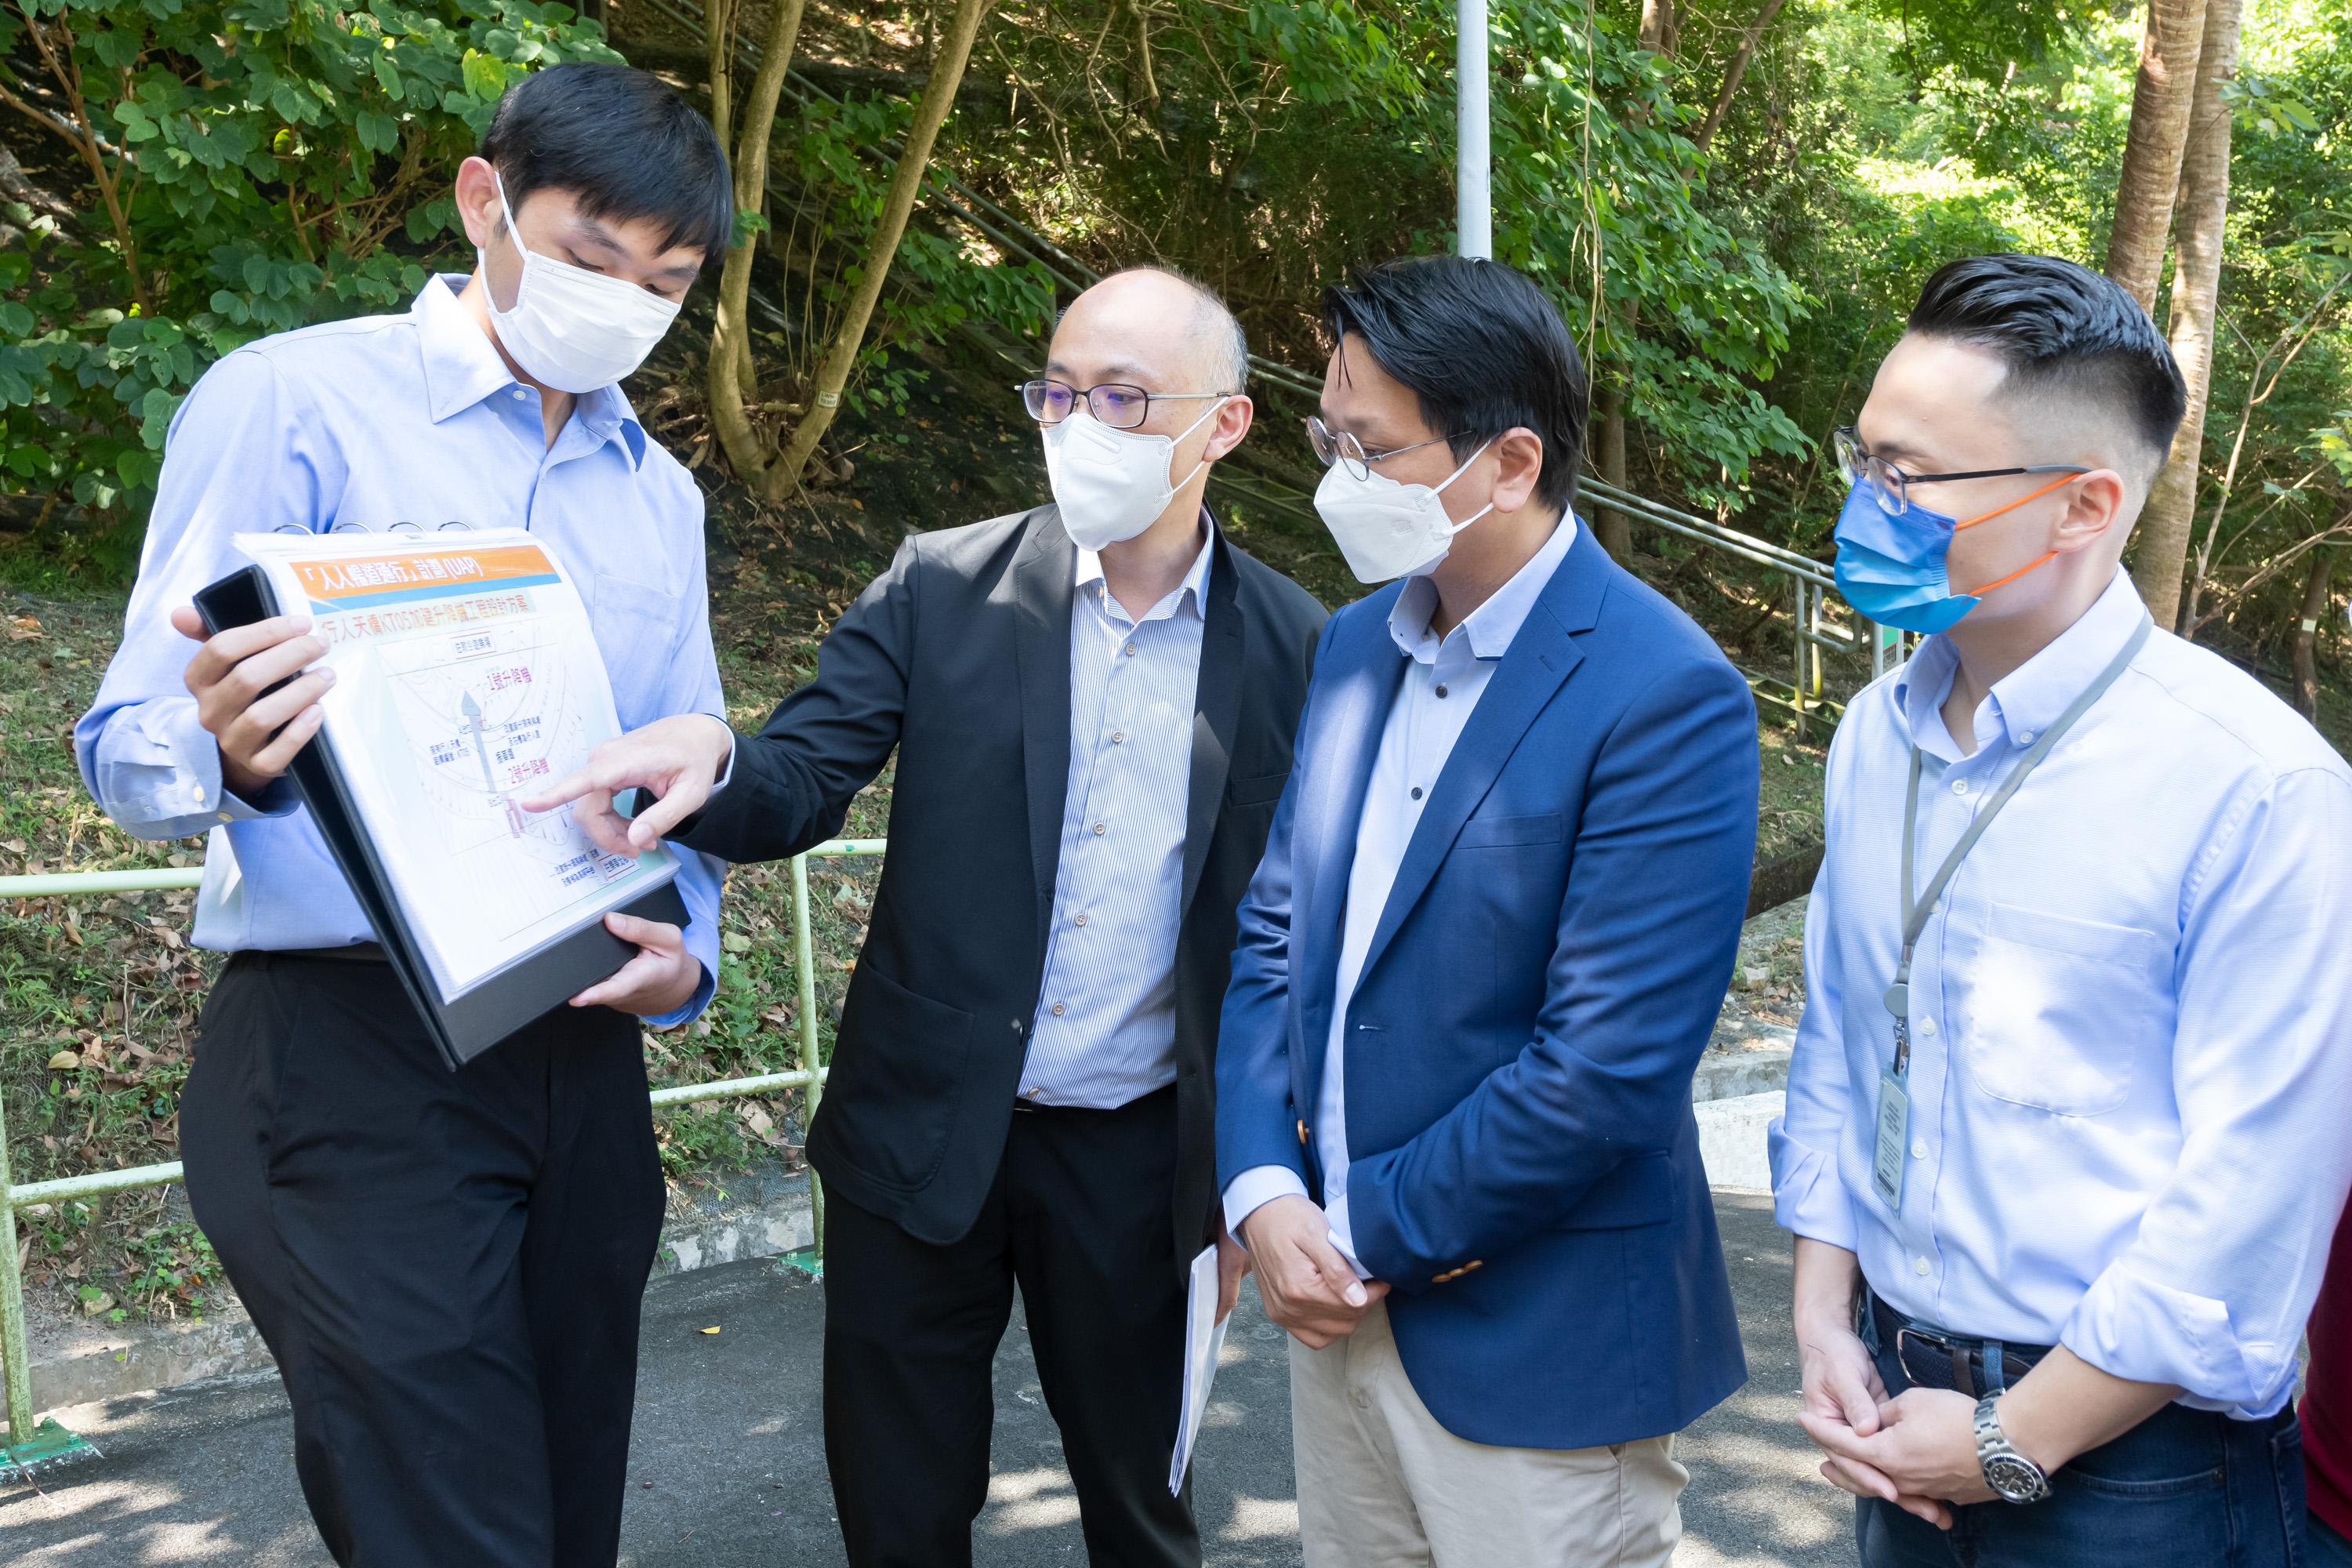 Members of the Legislative Council (LegCo) conducted a site visit at the staircases on the slope of Lok Wah North Estate in Kwun Tong today (October 12) to follow up on a complaint case relating to retrofitting barrier-free access facilities. Photo shows LegCo Members Mr Tang Ka-piu (second right) and Mr Edward Leung (first right) receiving a briefing by government representatives on the progress of the lift installation works at a footbridge near the staircases on the slope of Lok Wah North Estate.